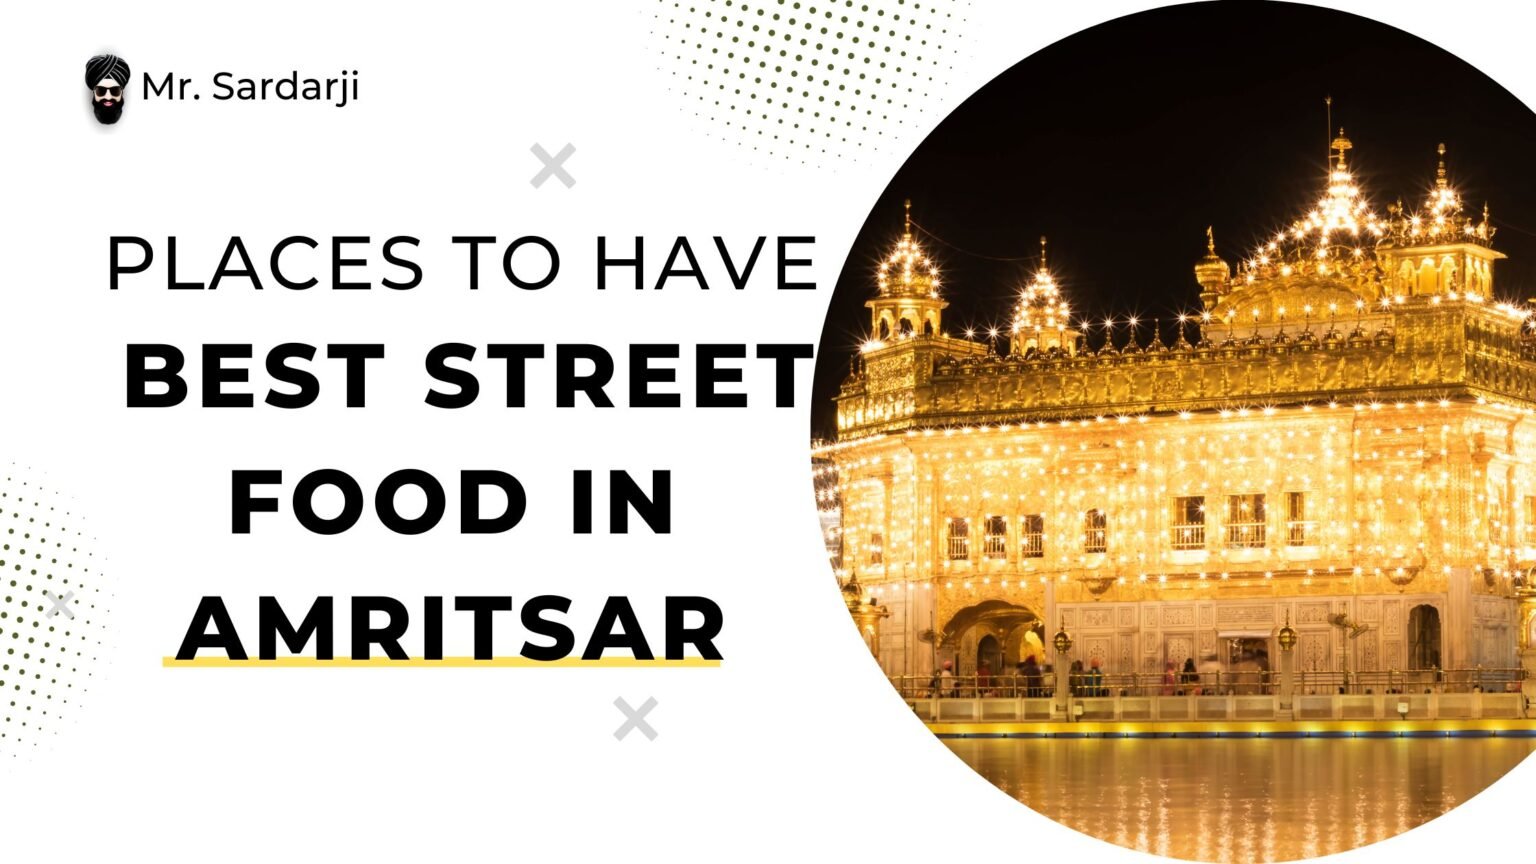 Places to have Best street Food in Amritsar